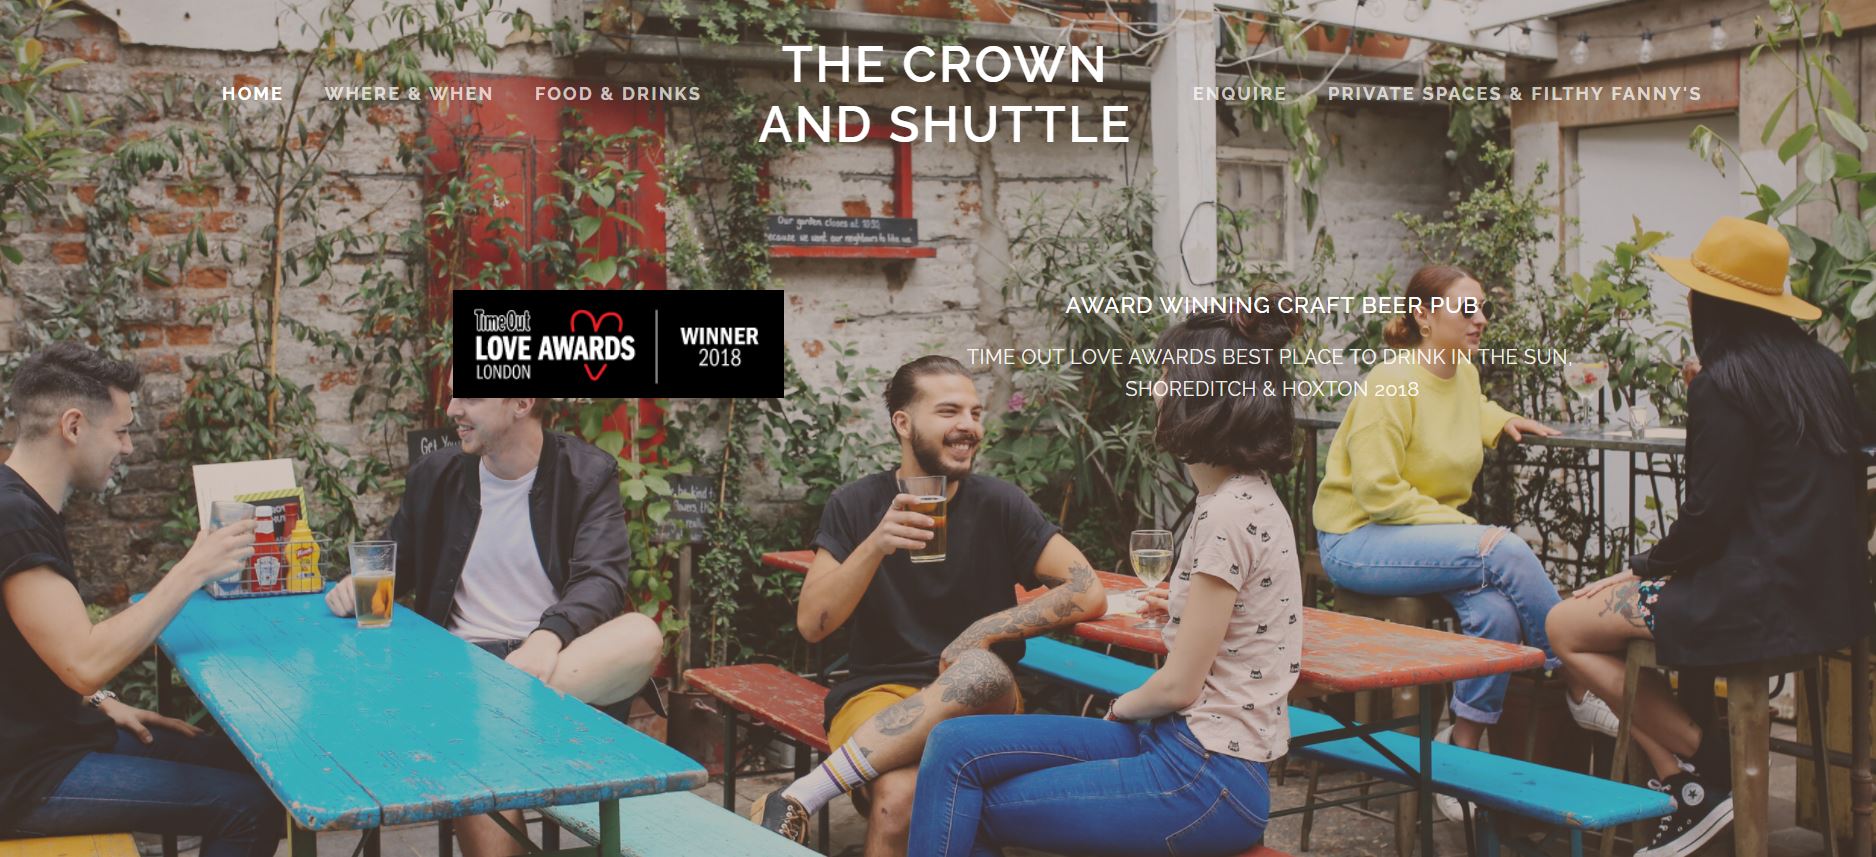 The Crown and Shuttle